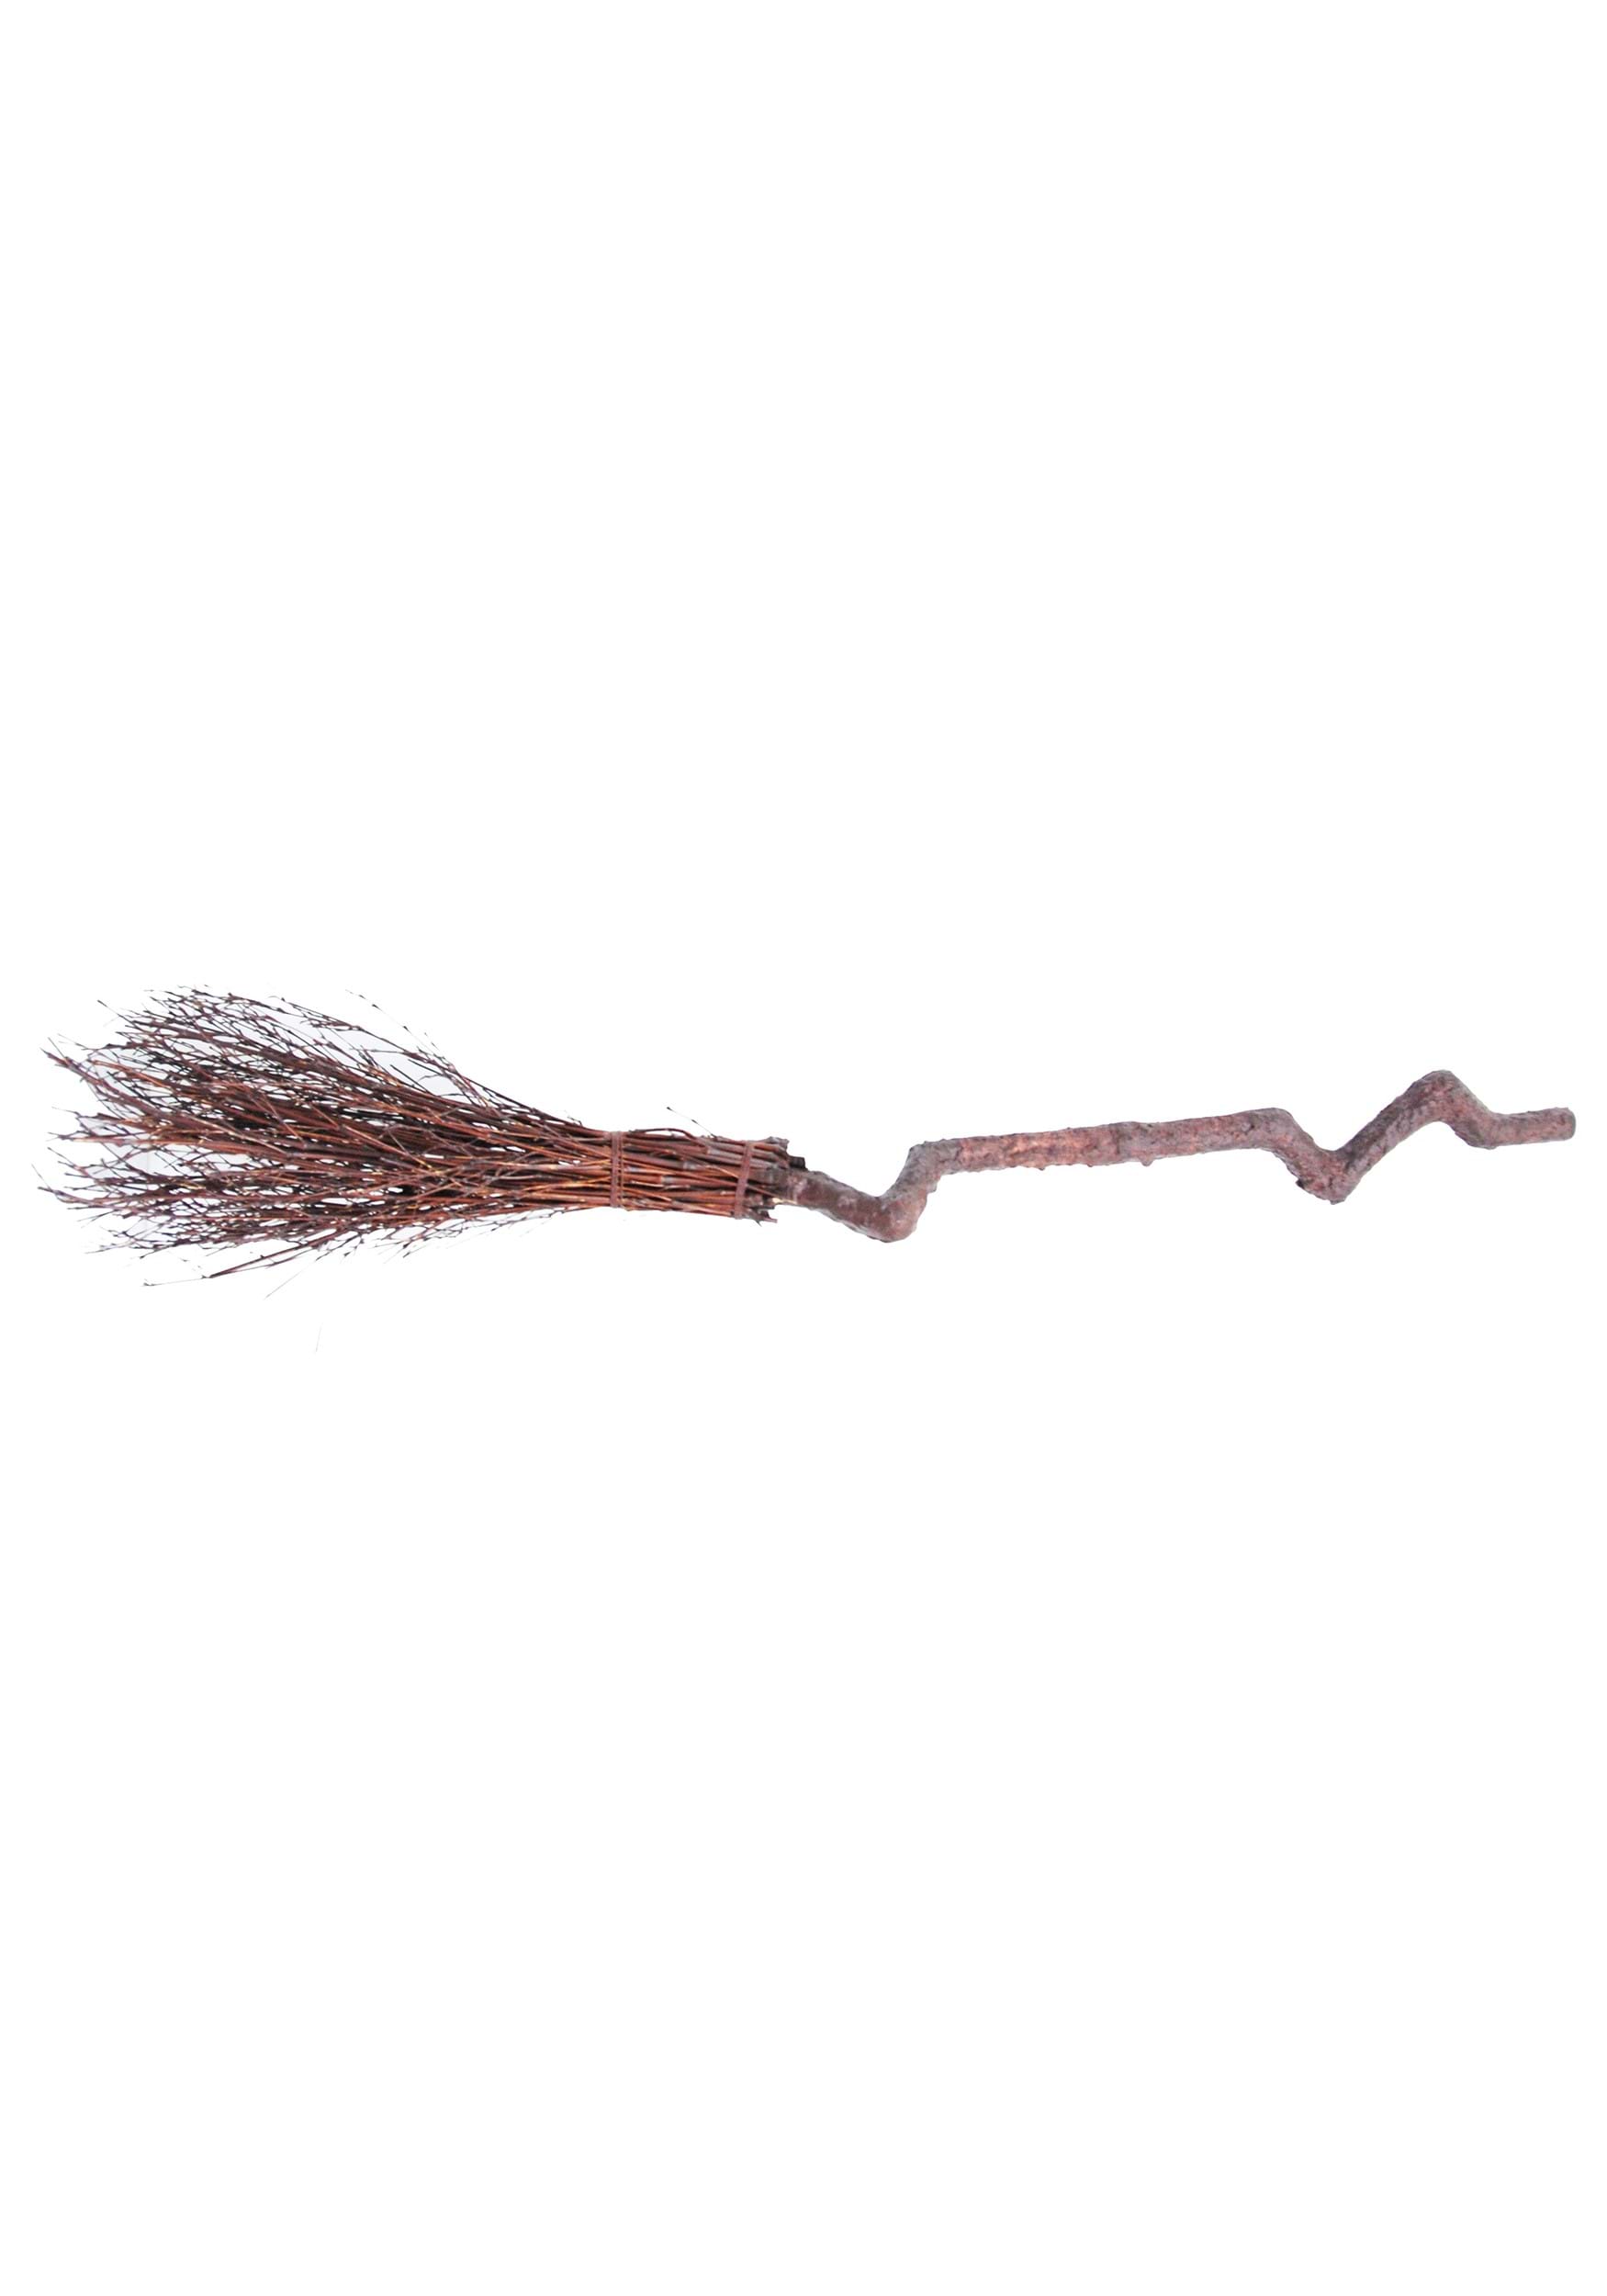 Crooked Witch Broom